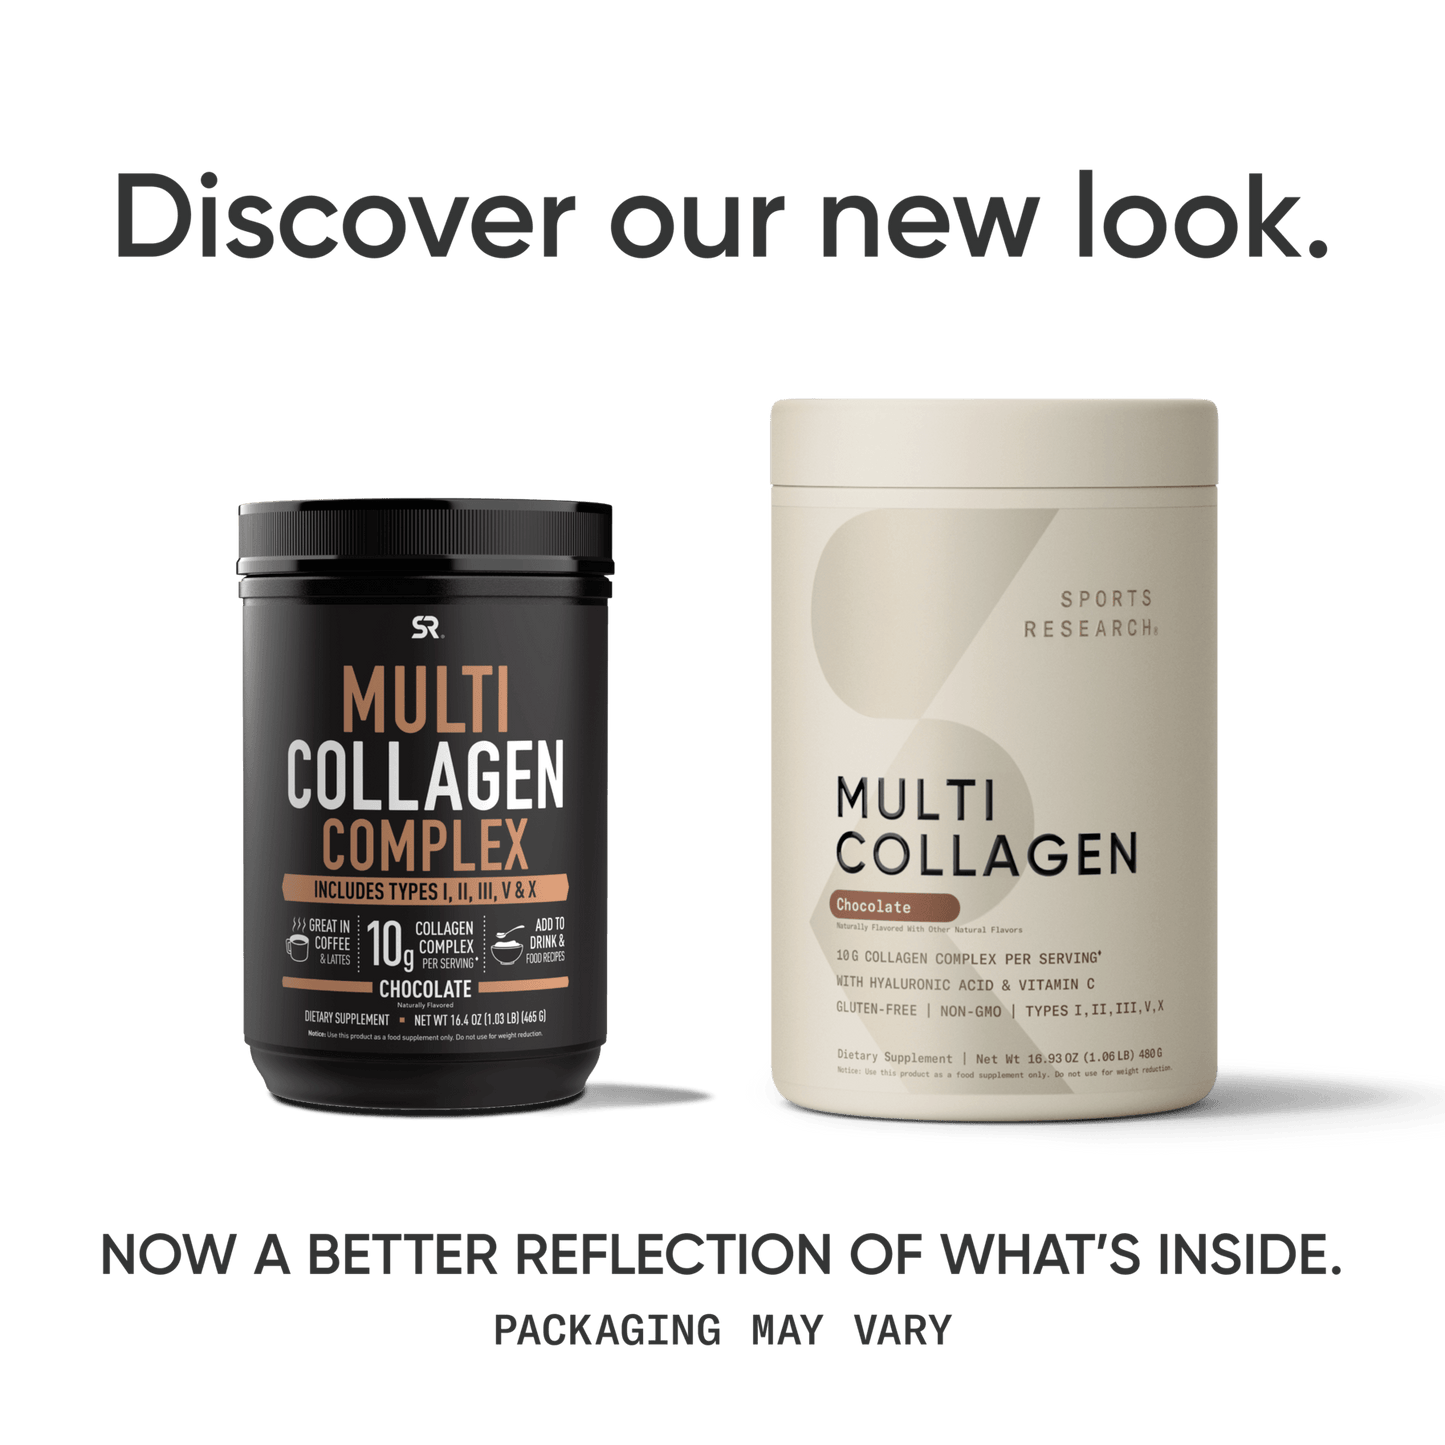 Discover our new Sports Research Multi Collagen Powder with 5 Types of Collagen complex.